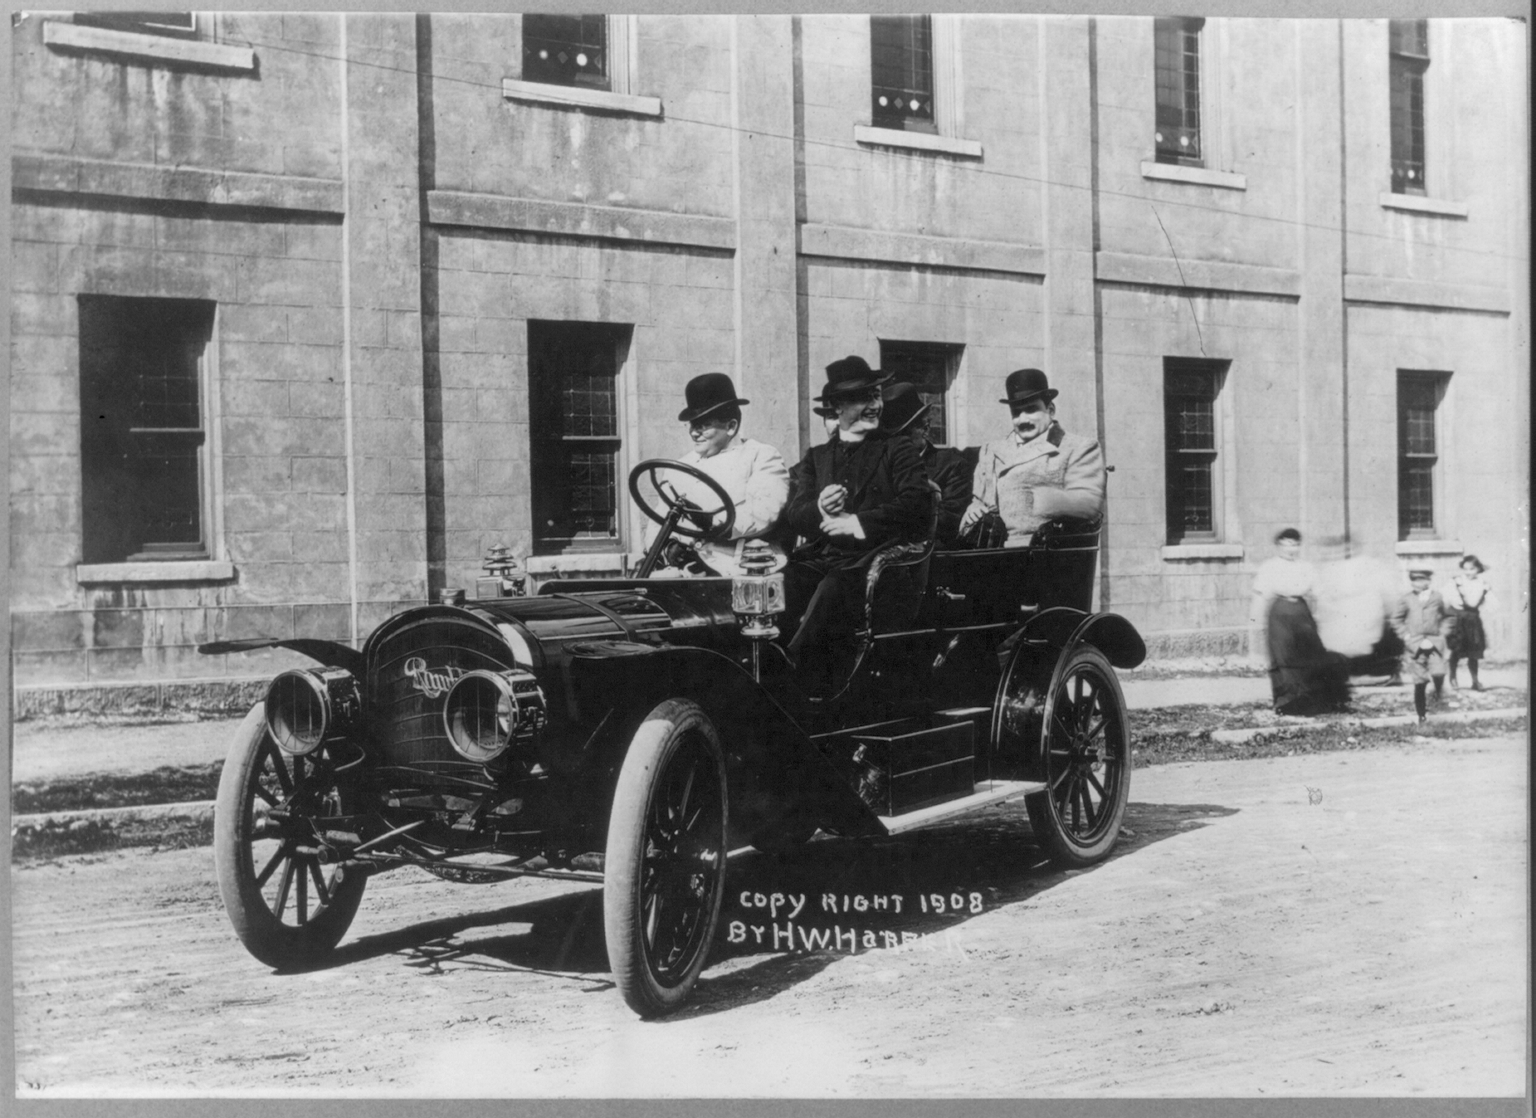 Enrico_Caruso_seated_in_automobile_with_4_other_men.png